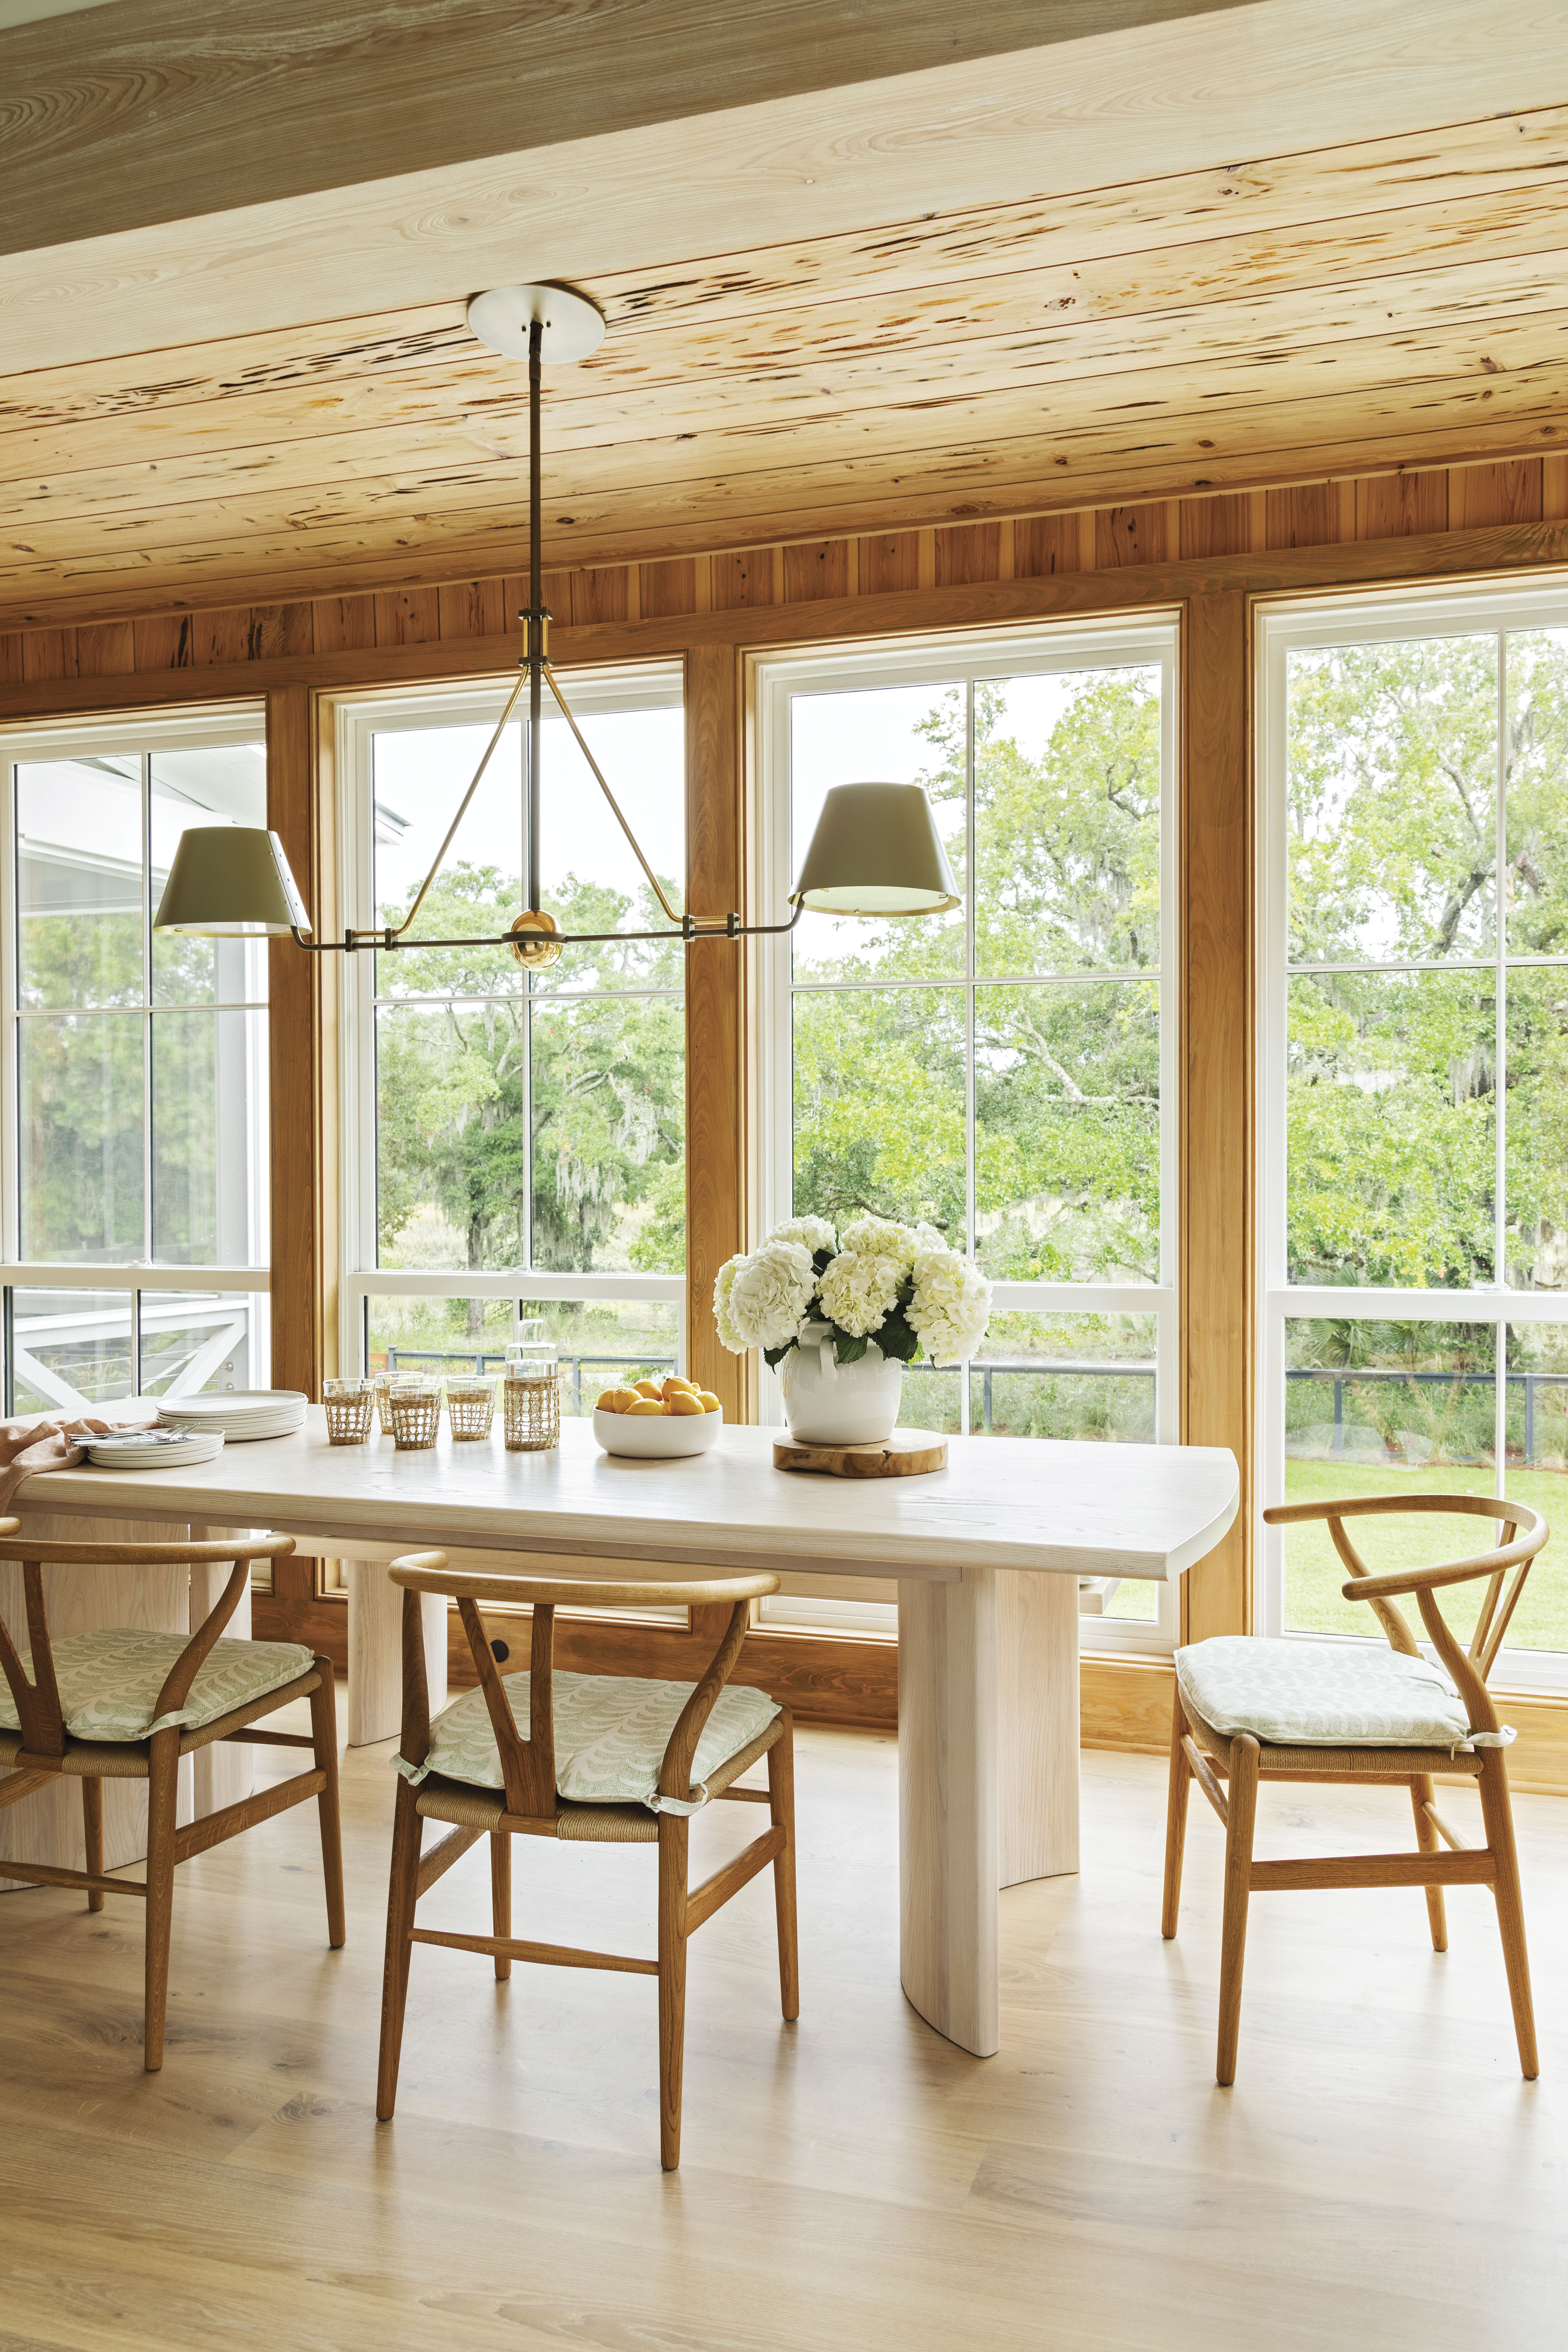 Natural Selection - When your backyard hosts spartina and live oaks, roseate spoonbills and dolphins, it’s best to let nature take center stage. To complement—but not compete with— the view, architect Beau Clowney filled this dining nook with floor-to-ceiling windows, and interior designer Allison Elebash covered both walls and ceiling in pecky cypress planks.